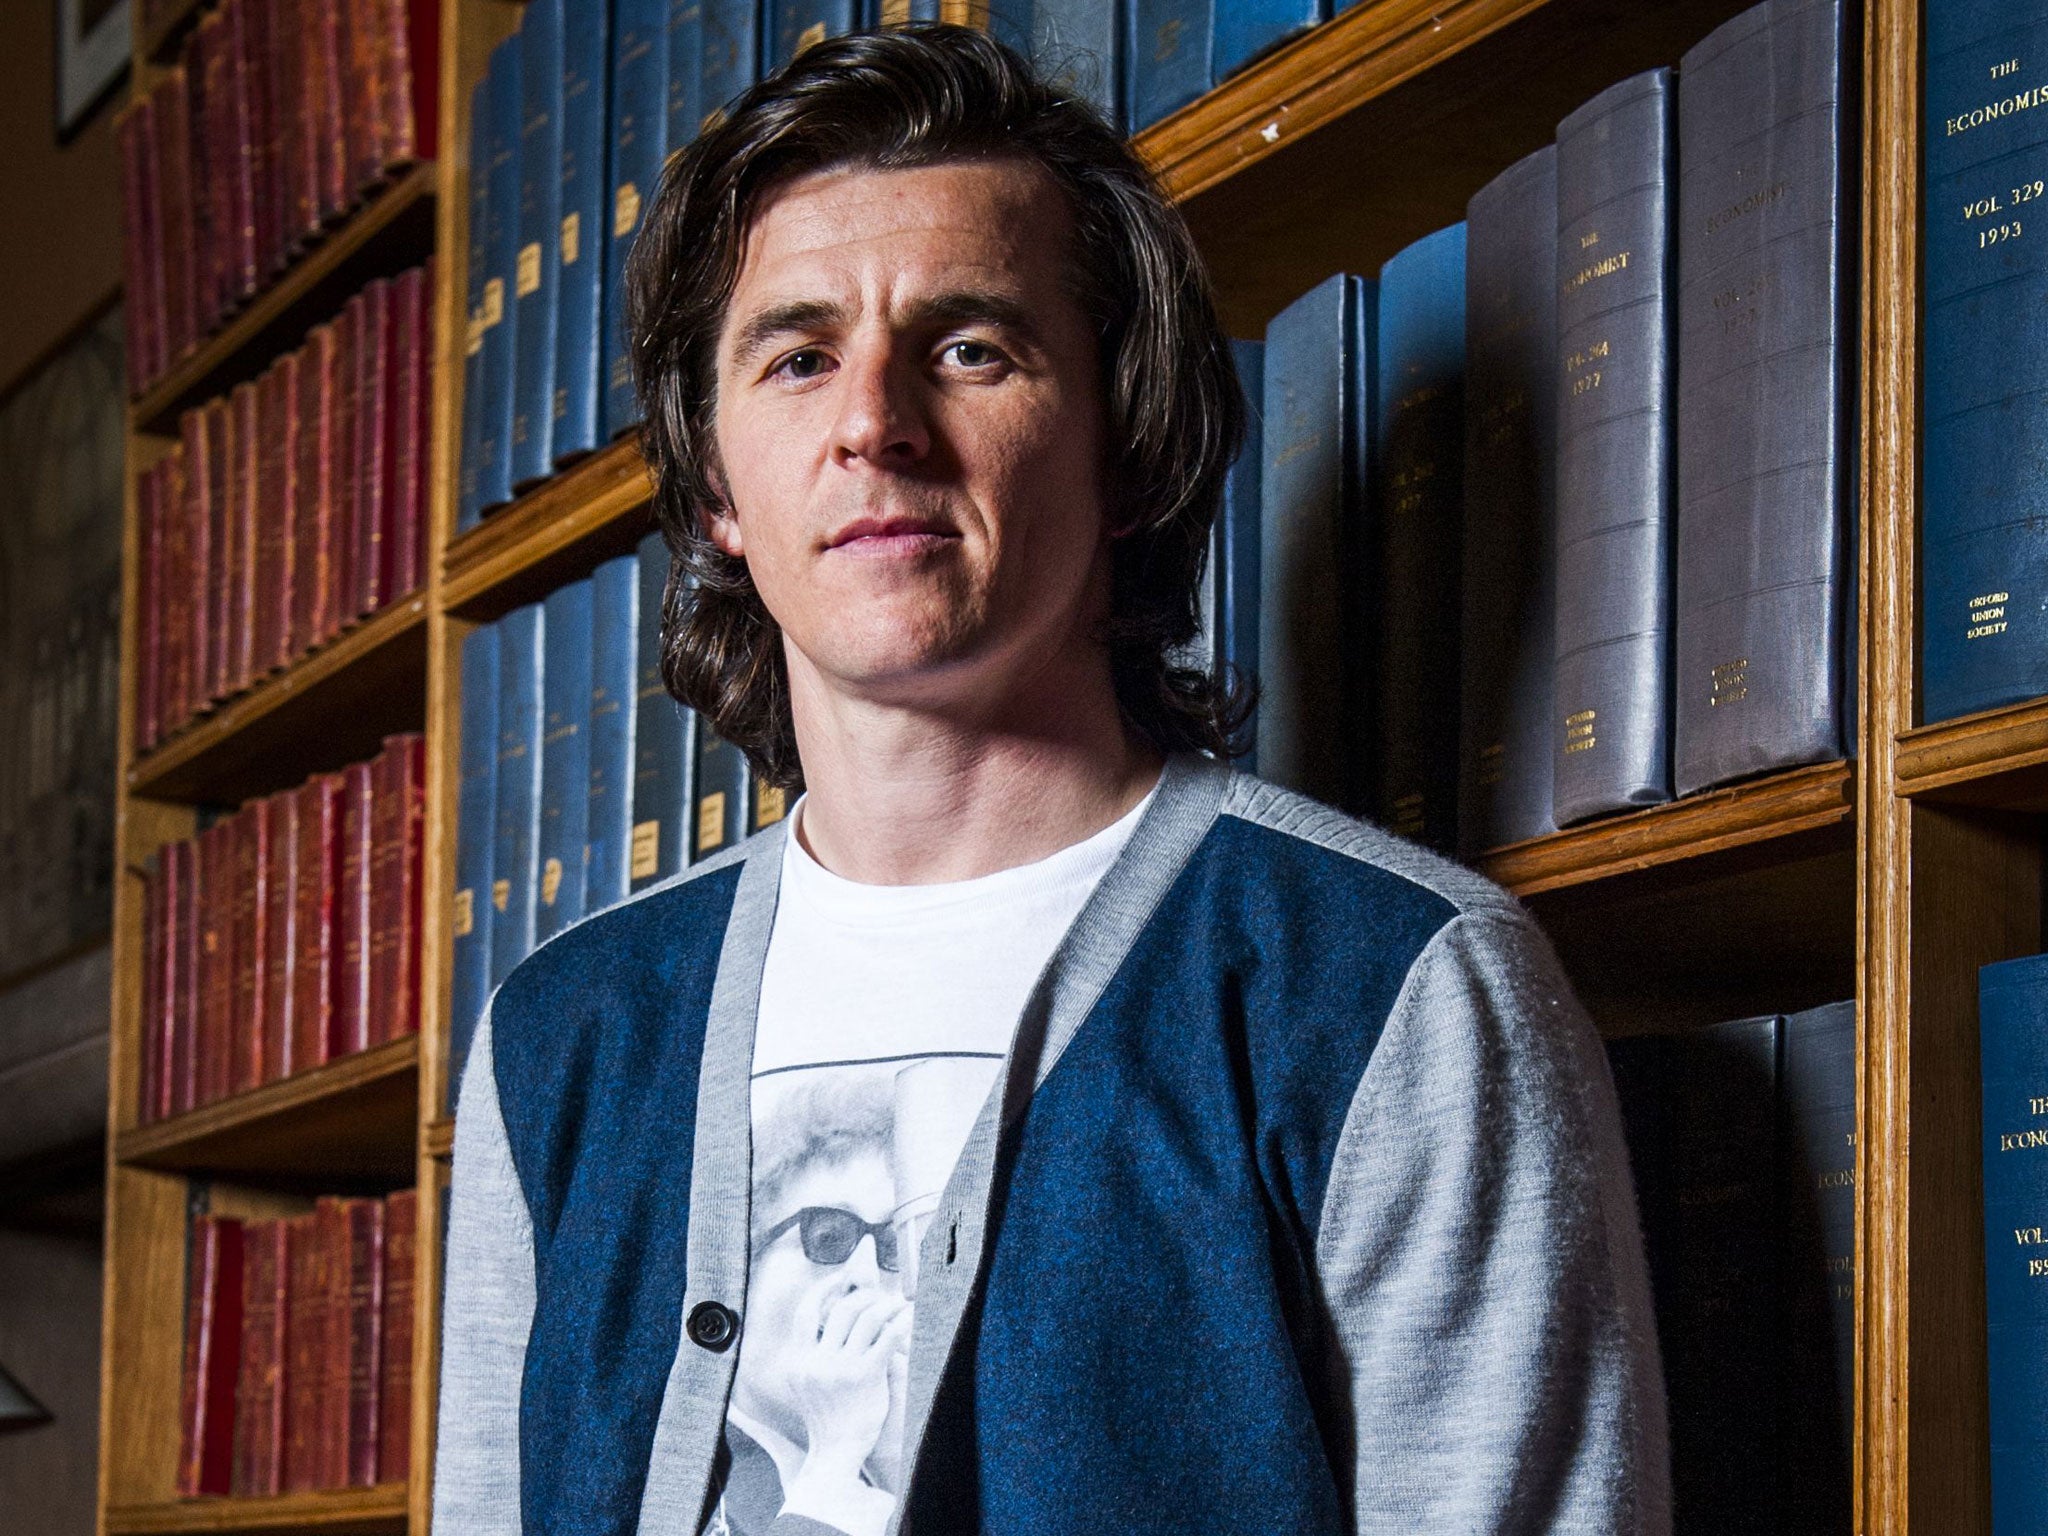 Joey Barton at the Oxford Union, where he addressed the students